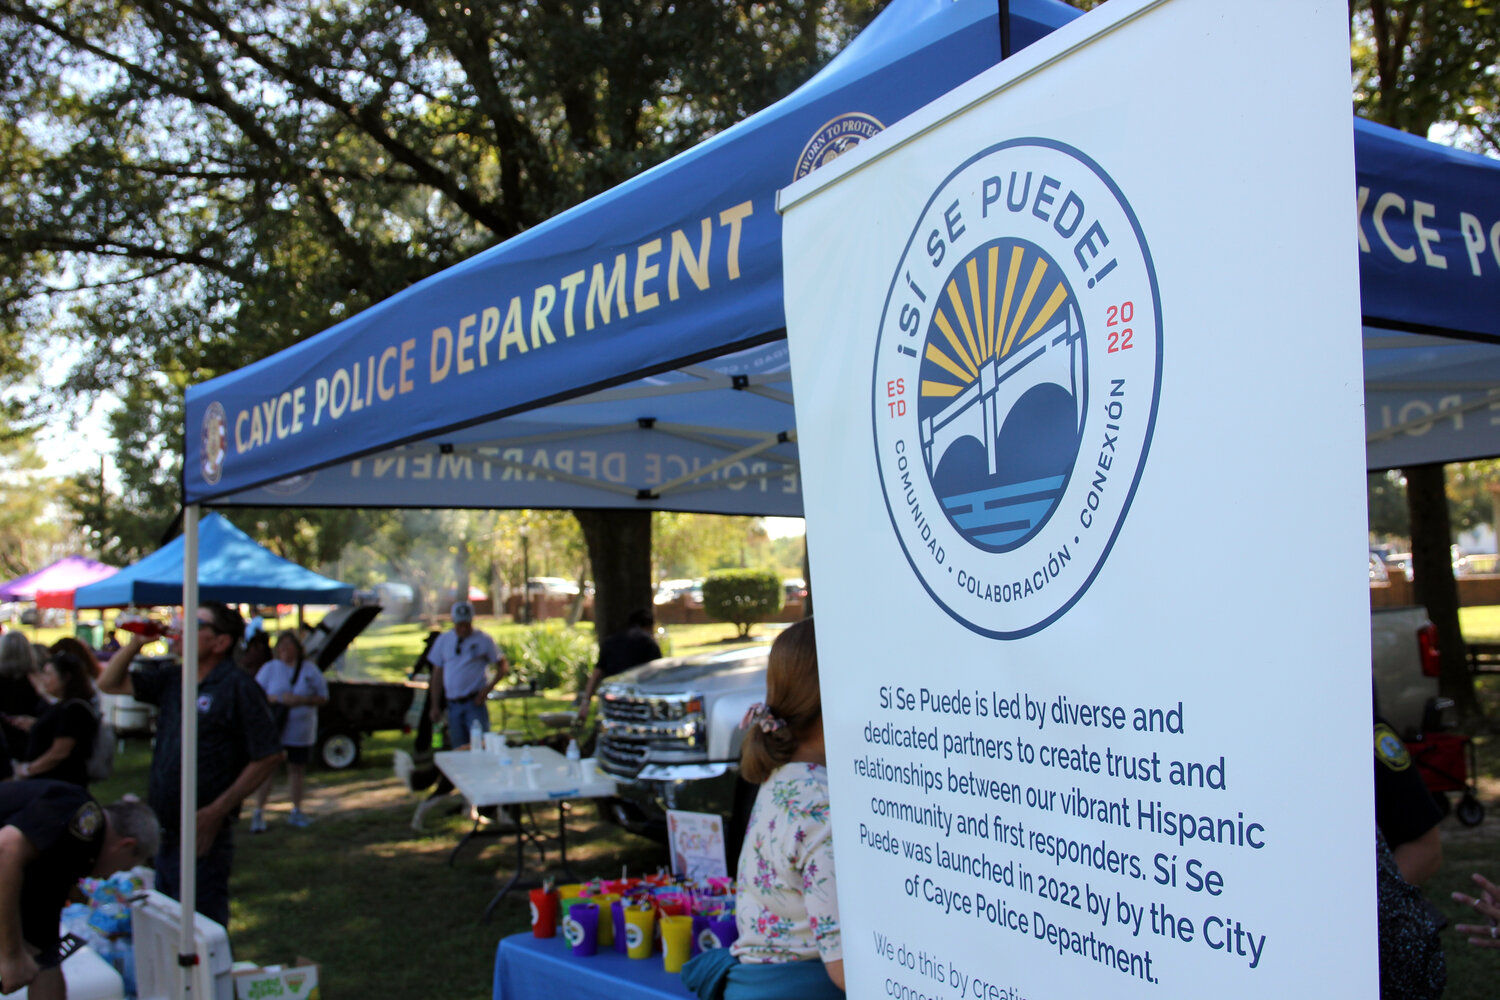 The Si Se Puede booth at the Cayce Police fiesta